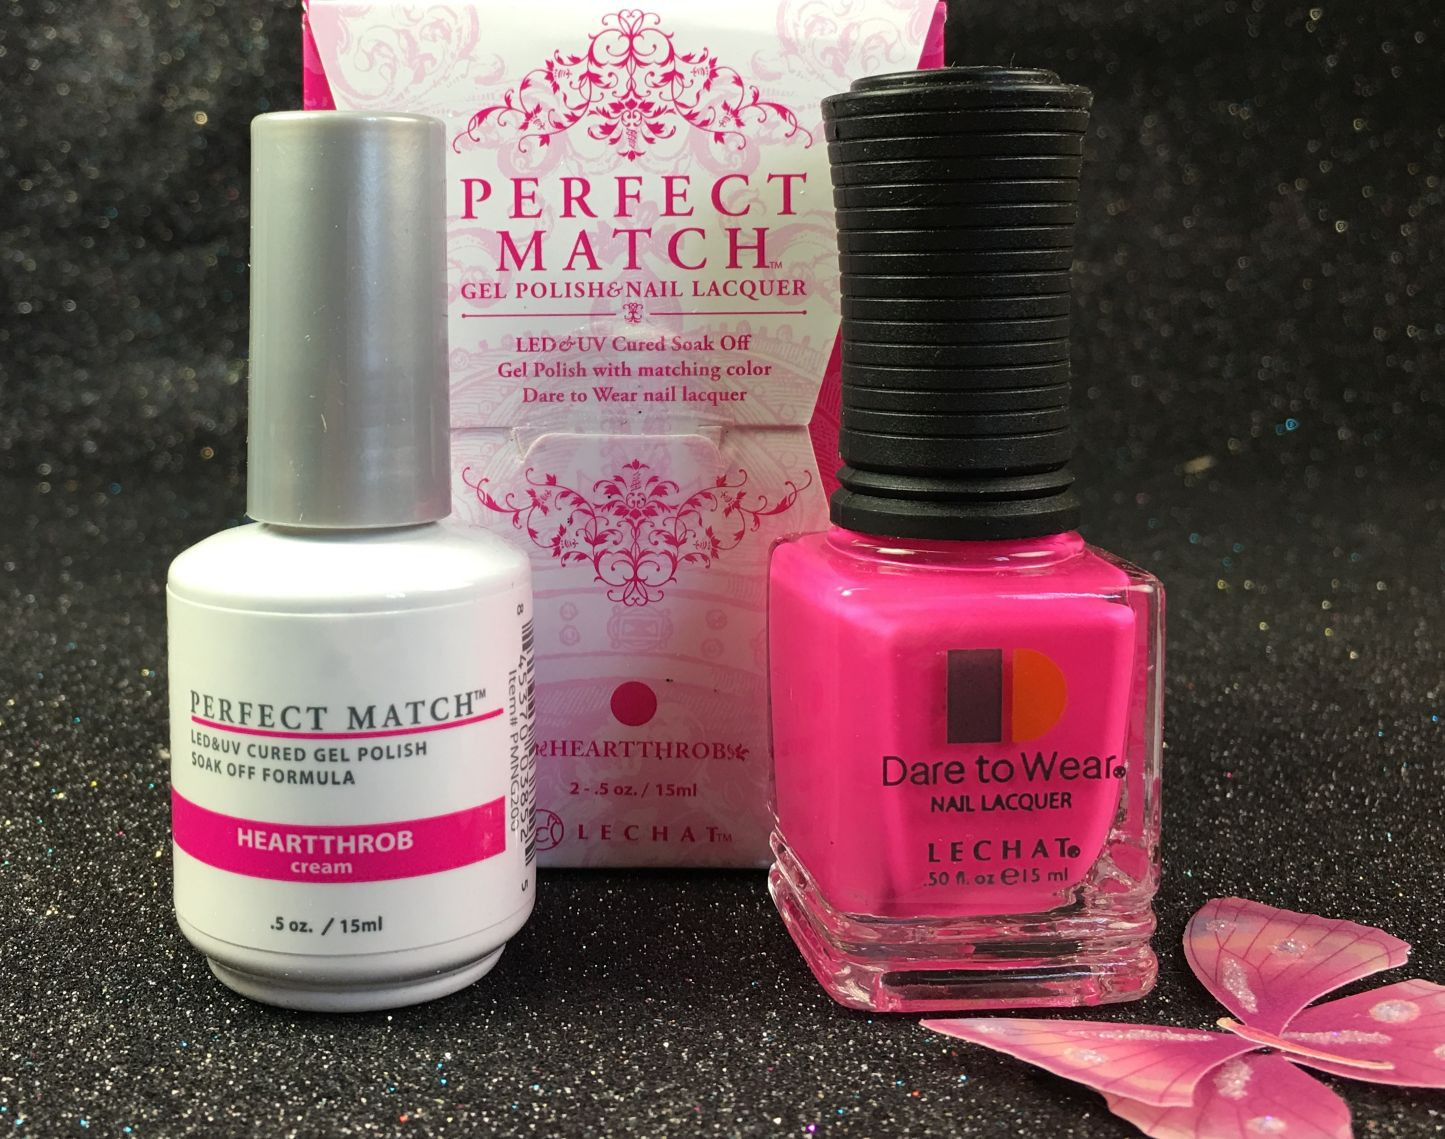 Perfect Match Nail Colors
 LeChat Heartthrob Perfect Match Gel Polish & Nail Lacquer